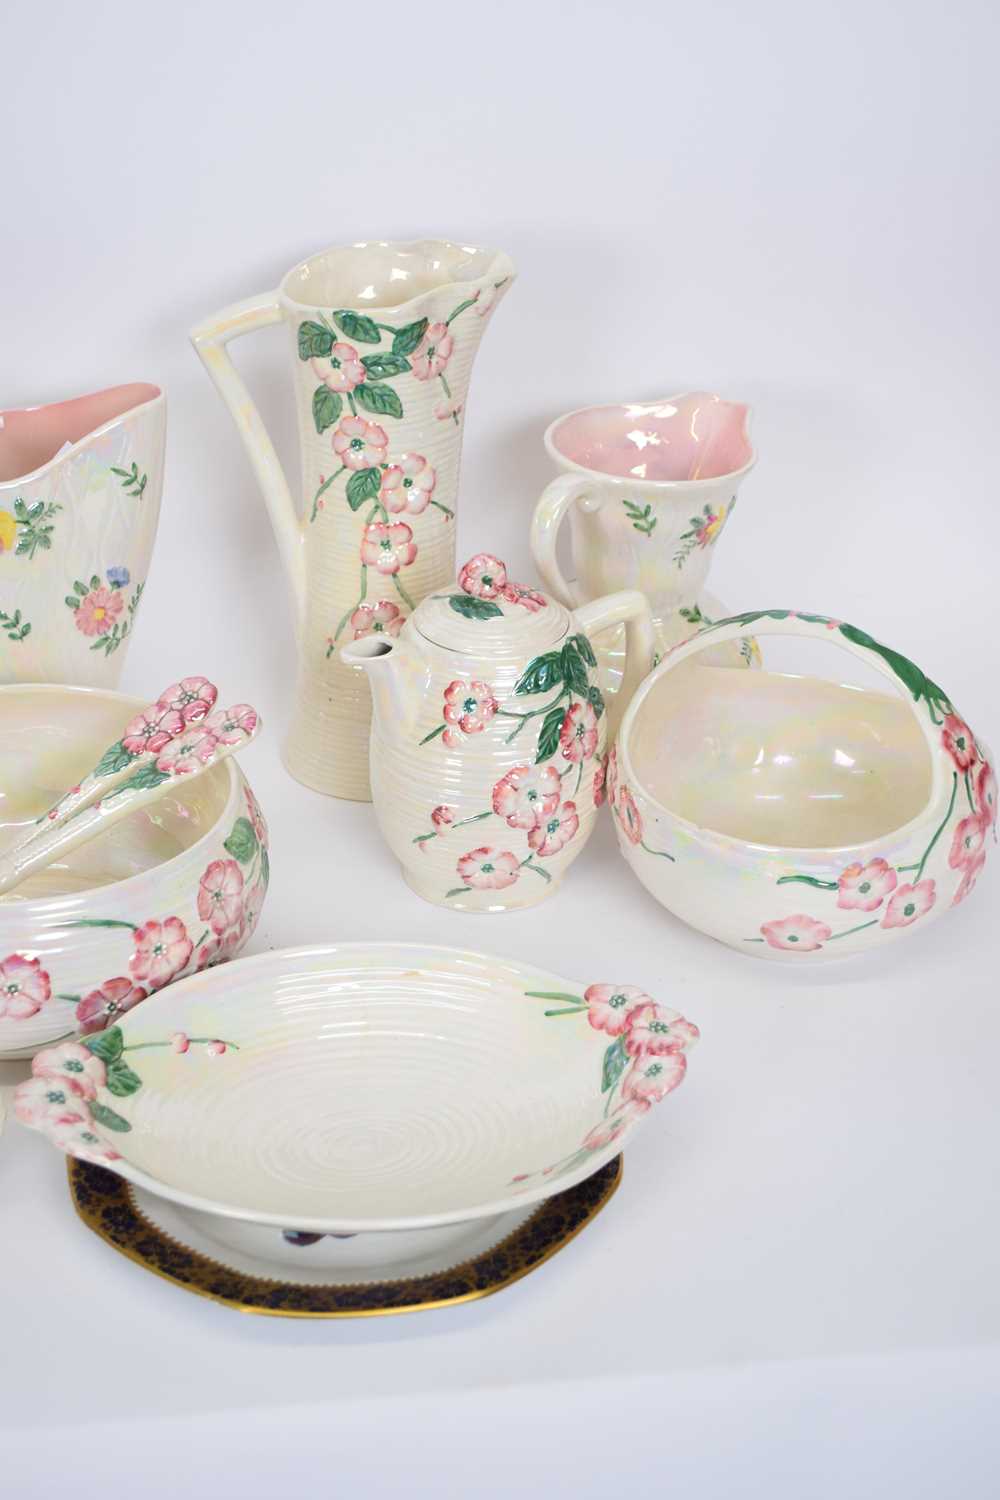 Group of Maling lustre wares decorated with peony including small candlesticks, salad set with - Image 3 of 3